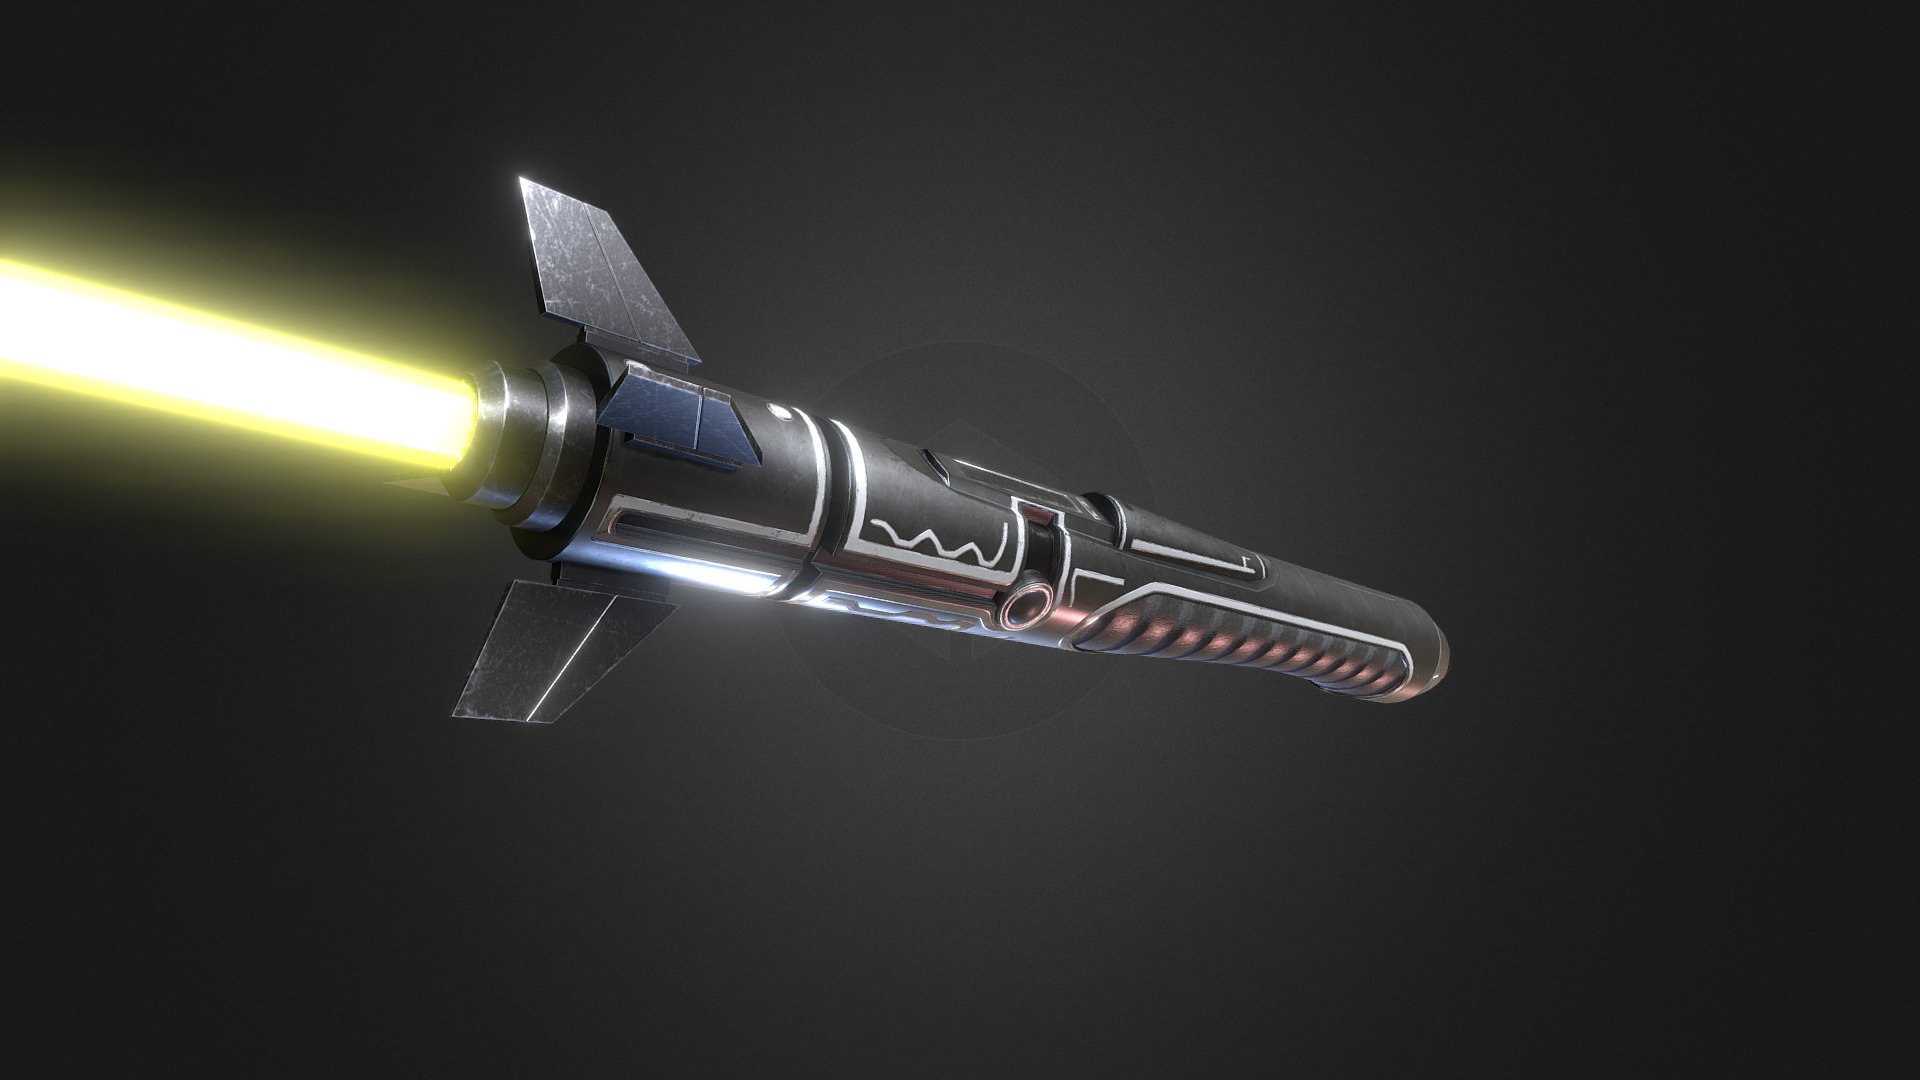 Ziost Guardian Lightsaber, based on the concept used in Star Wars: The Old Republic.

Made in Blender 2.91 and textured in Substance Painter 3d model